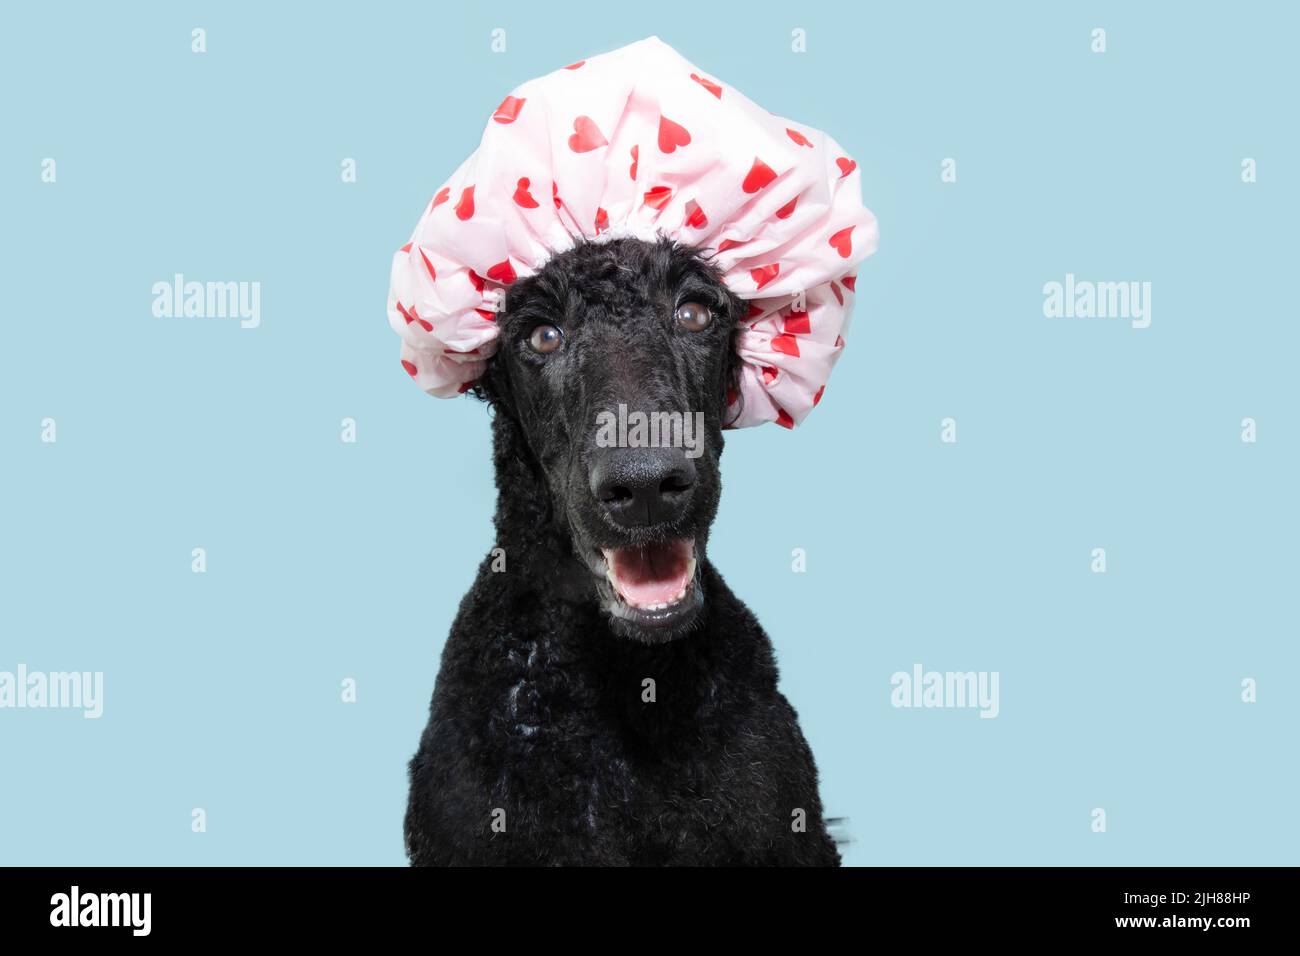 Funny hapy poodle dog wearing cap shower with hearts. Isolated on blue pastel background Stock Photo